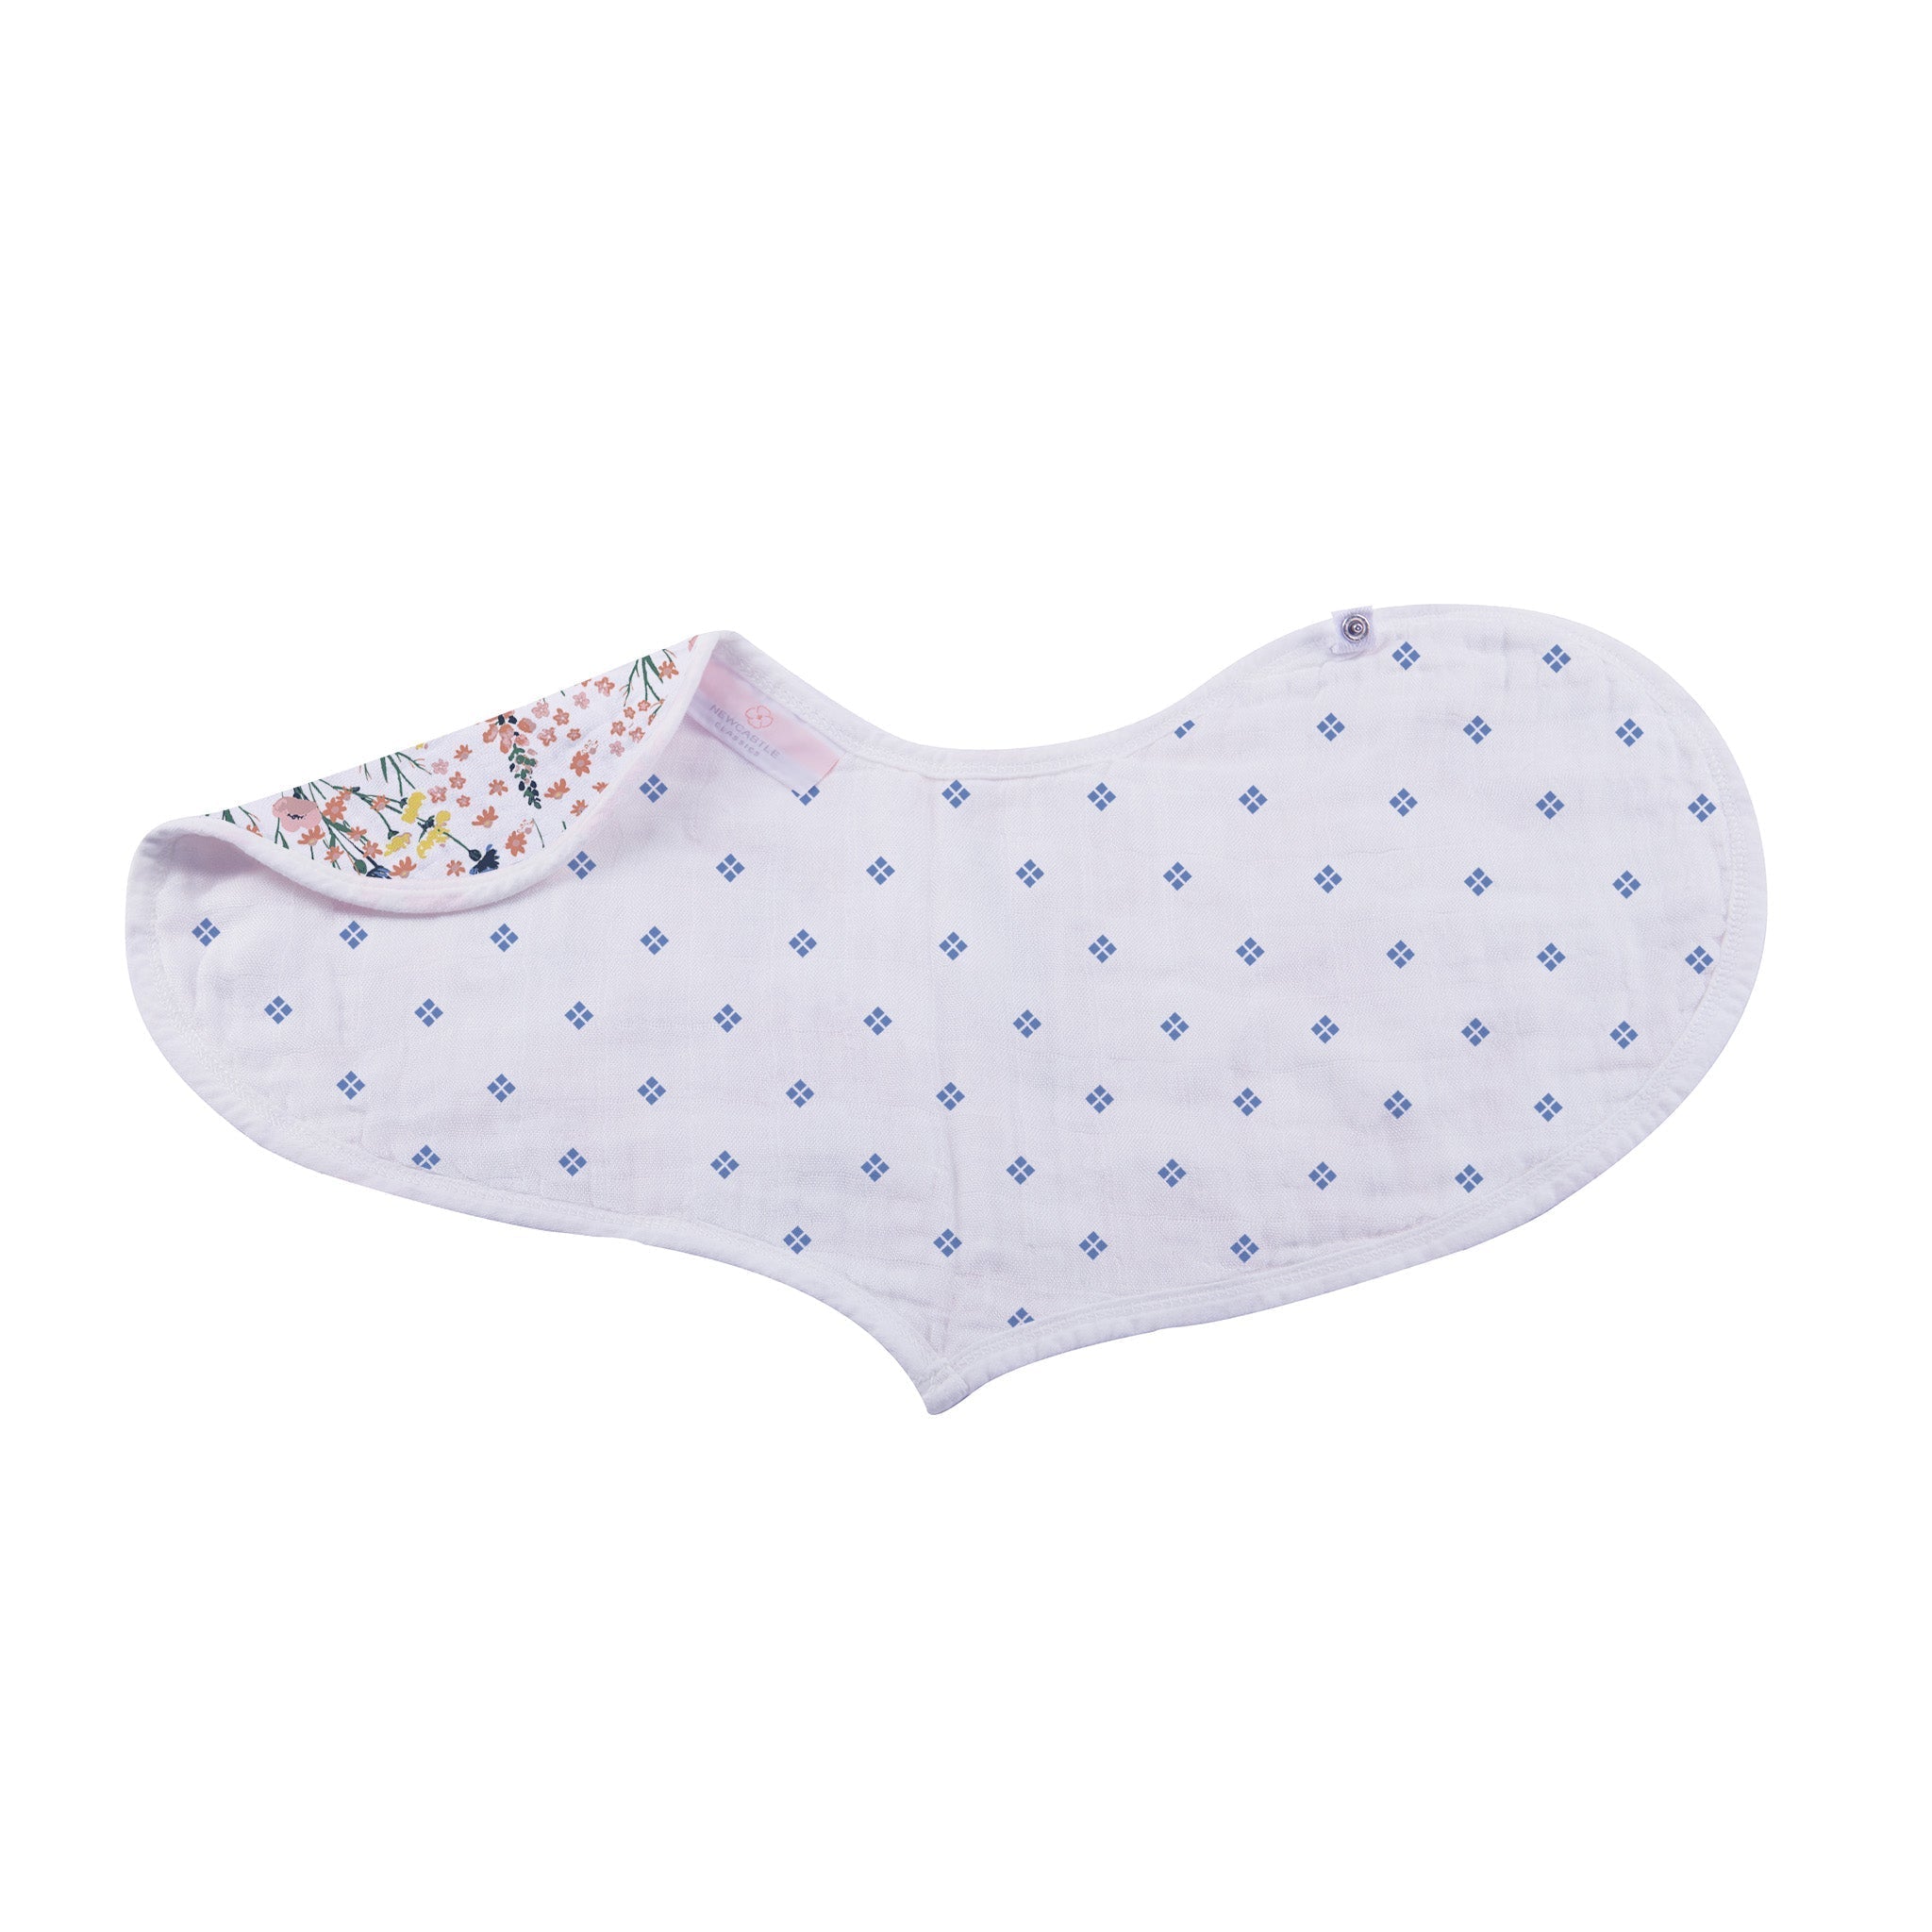 Heart bib for babies with wildflowers